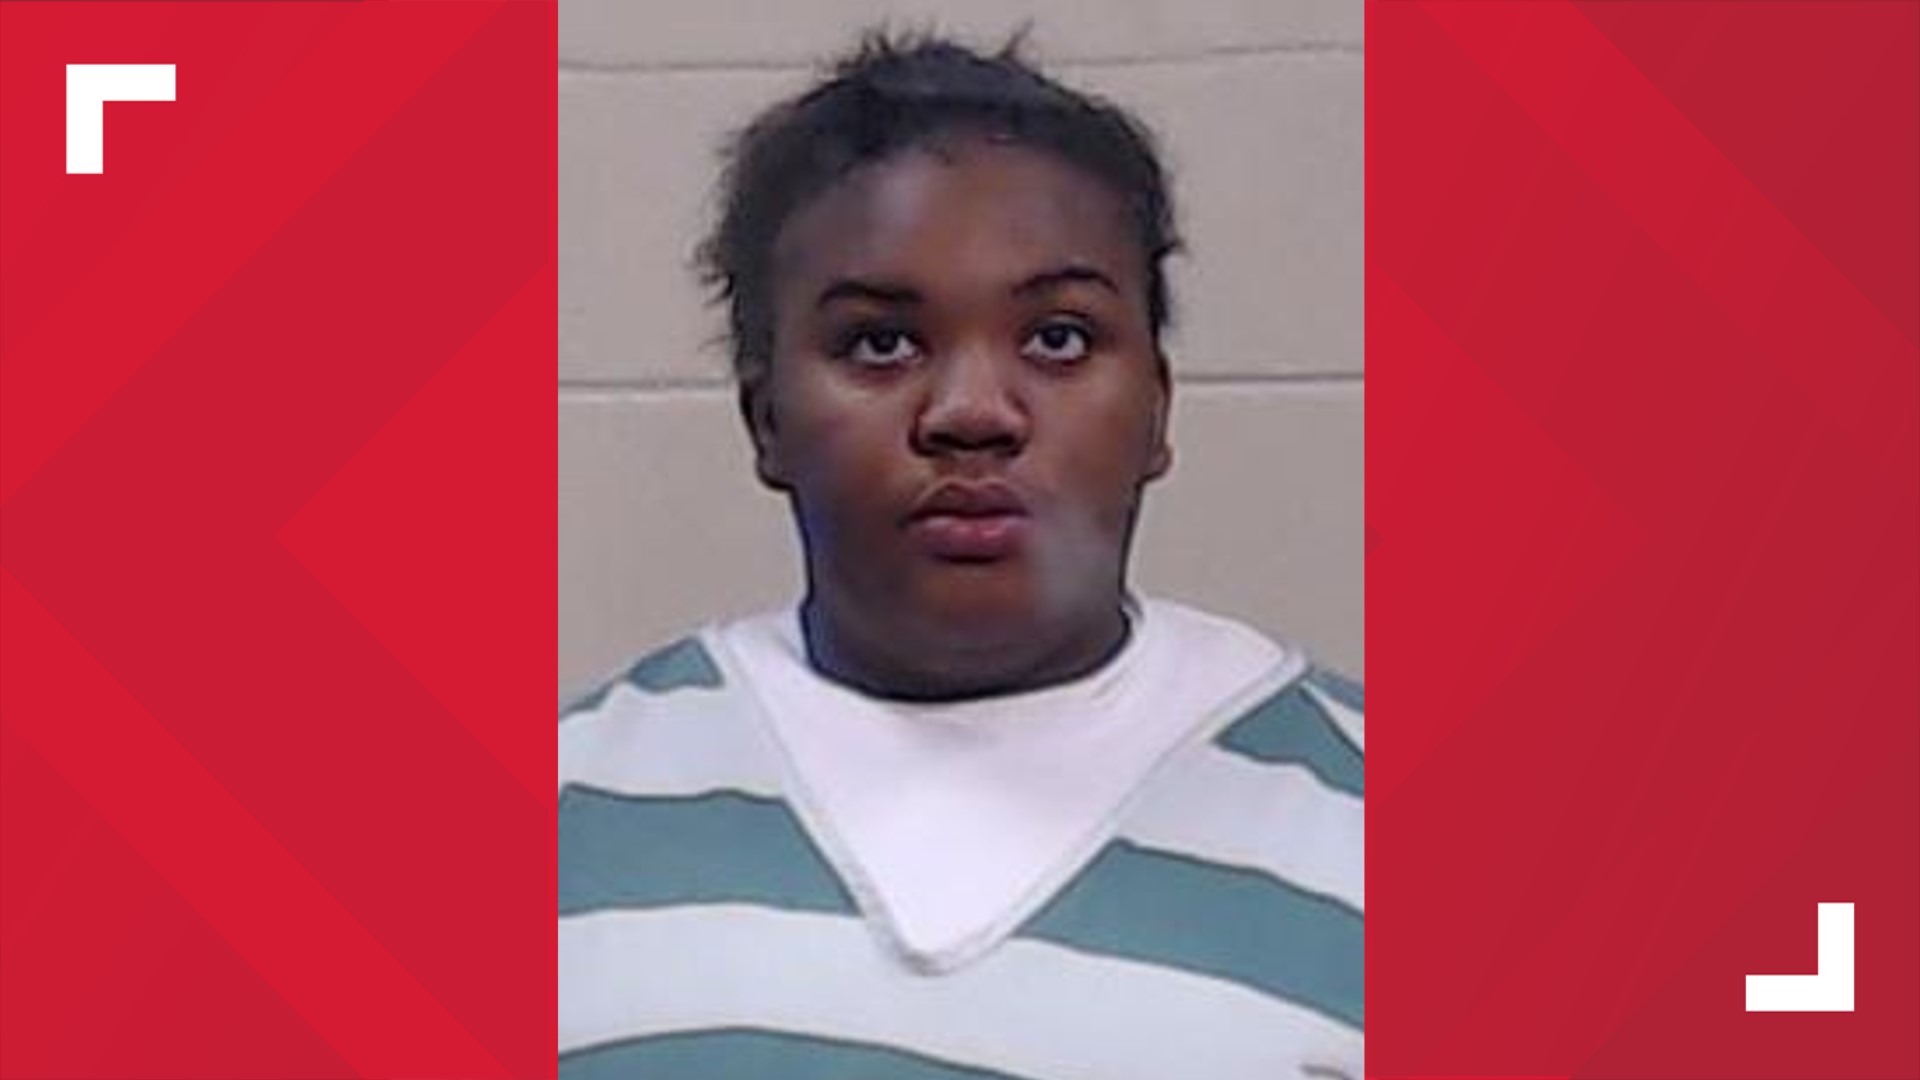 Cavaya Jefferson was charged with two counts of aggravated assault with a deadly weapon in connection to the shooting.